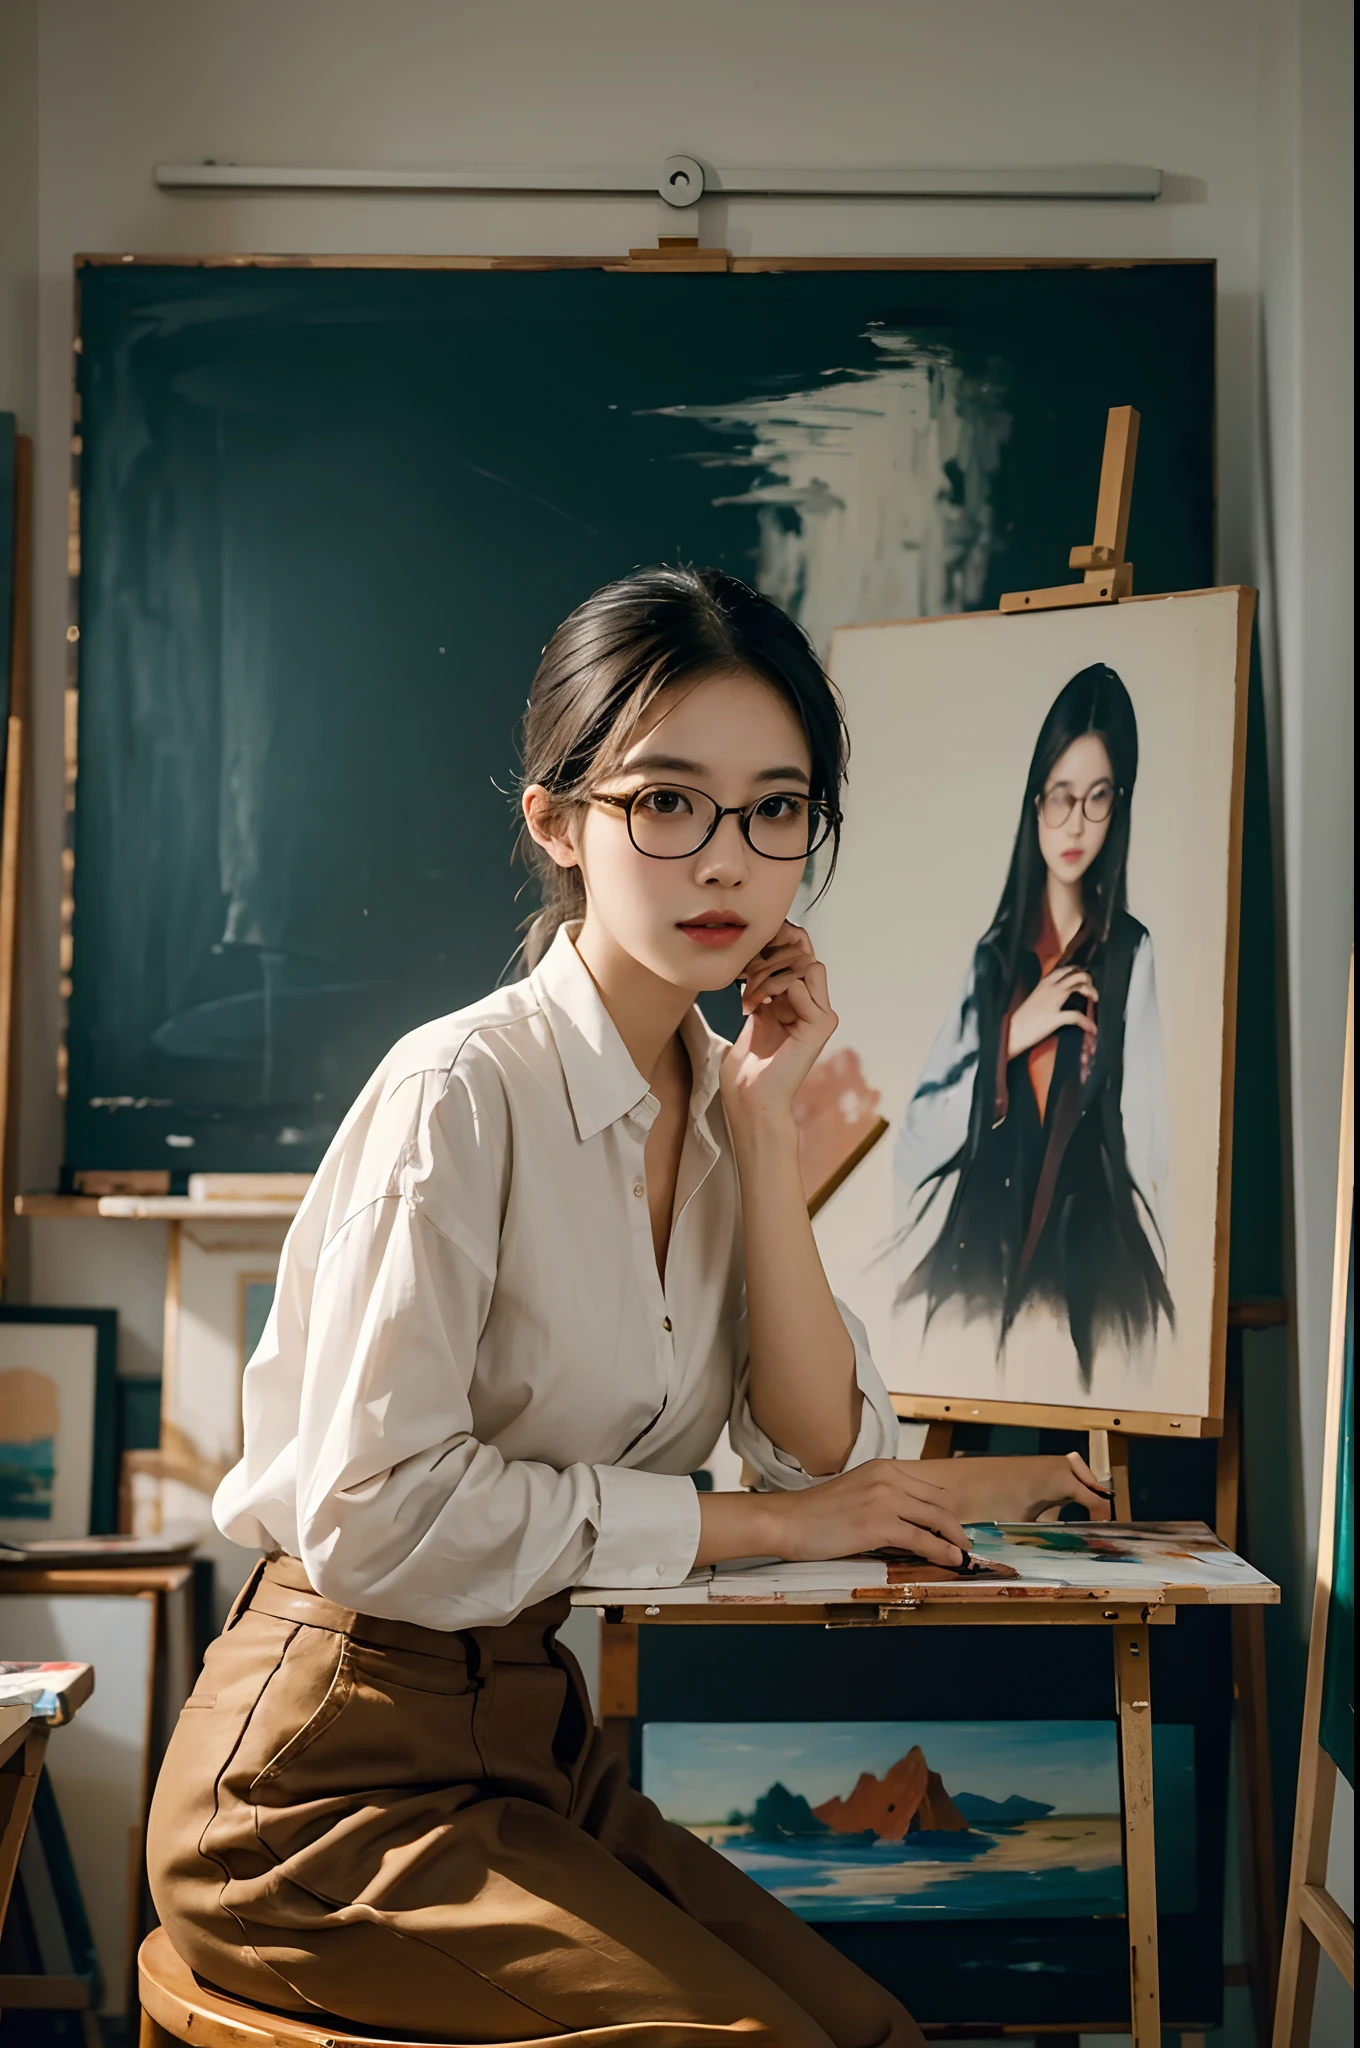 there is a woman sitting on a chair with a 绘画 on the easel, a fine art 绘画 inspired by Lin Liang, 艺术站, 过程艺术, 戴眼镜, 戴眼镜 on, 在她的艺术室里, 美丽的亚洲女孩, 绘画, 绘画, 厚眼镜, 戴眼镜, 韩国女孩, 穿着整齐. 绘画 of sexy, 书呆子外表